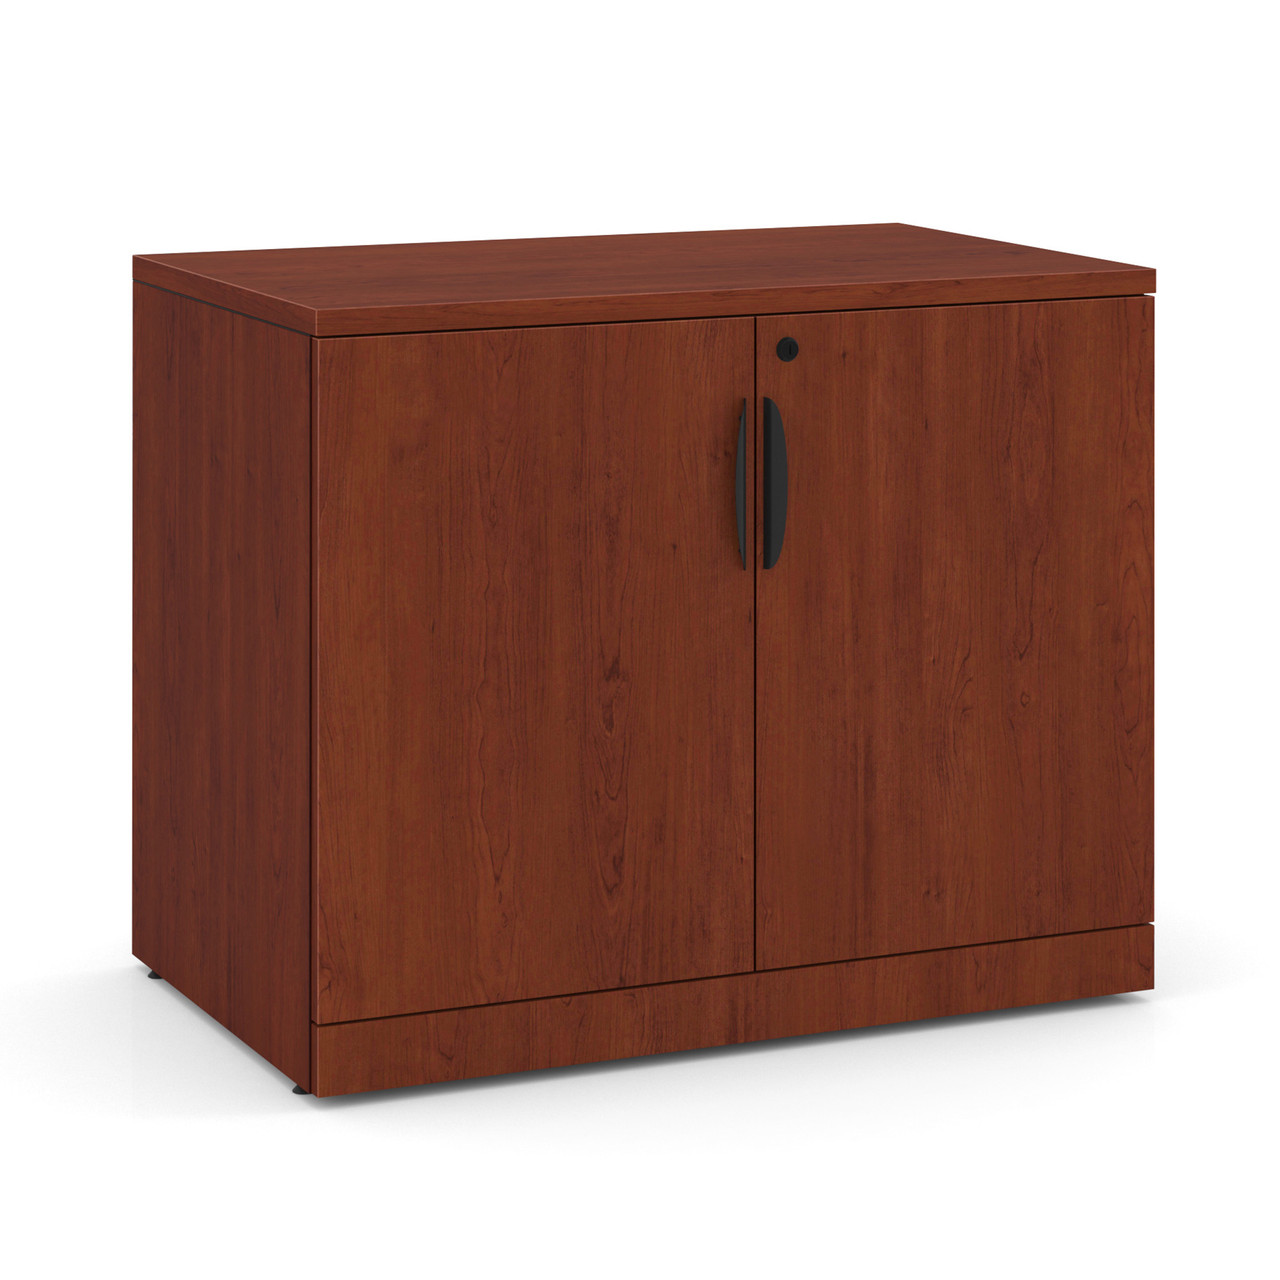 What I am sharing today is the crevice storage cabinet#